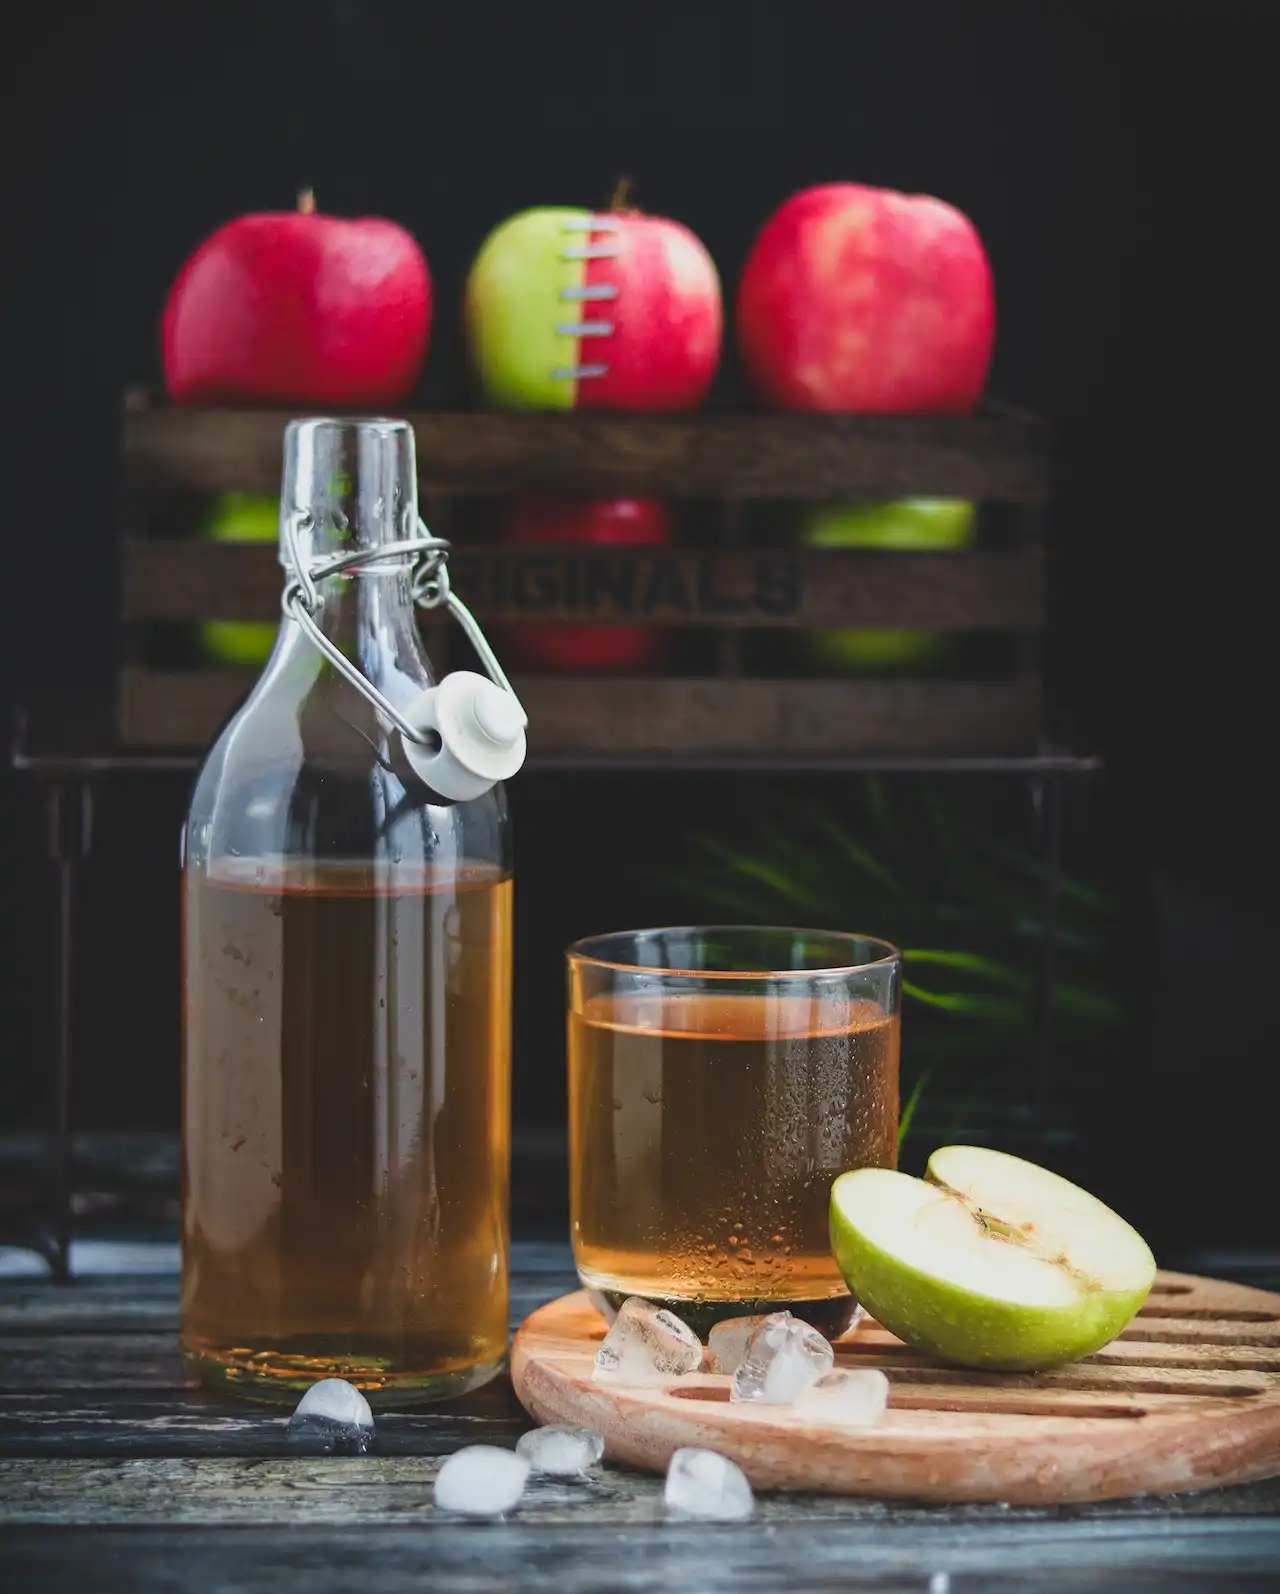 Apple Cider Vinegar: 7 Amazing Health Benefits for a Healthy Lifestyle